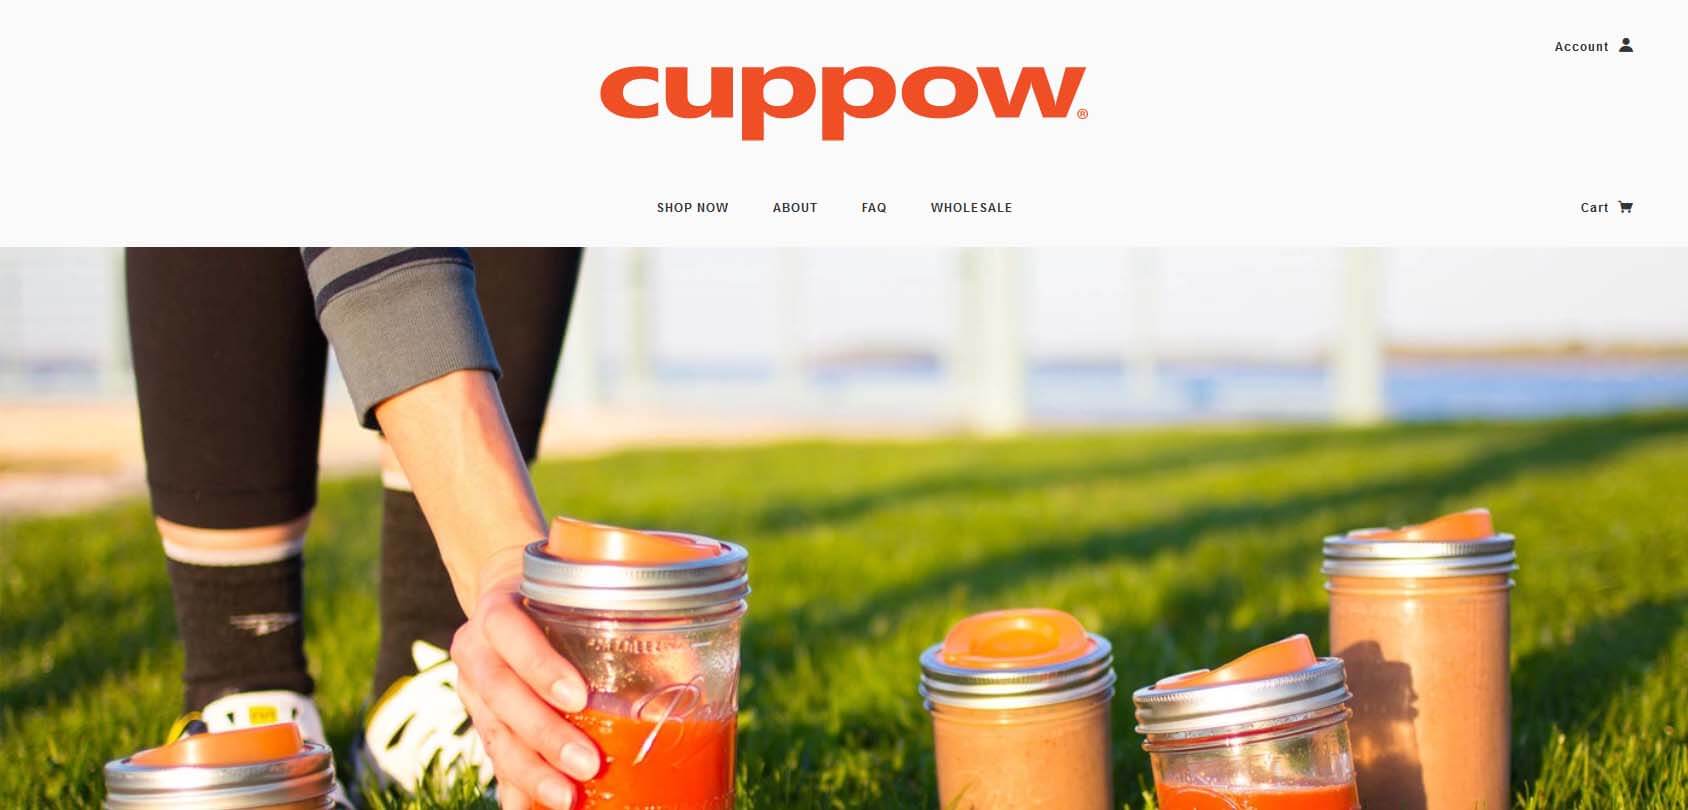 Cuppow homepage